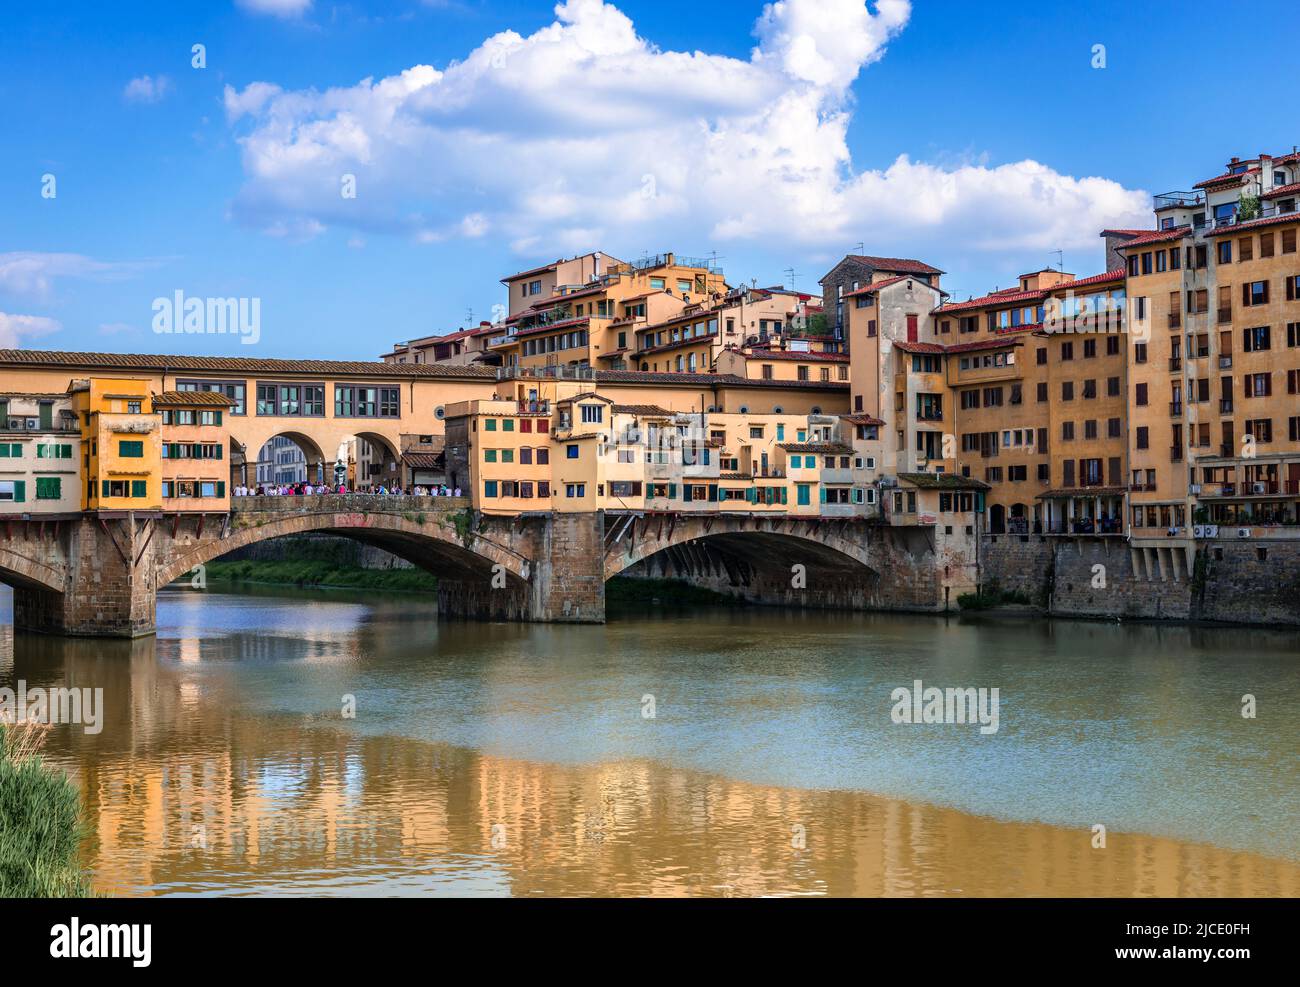 Ponte Vecchio (old Bridge) in Florence, Tuscany, Italy. A medieval stone bridge that spans river Arno and has always hosted shops and merchants. Stock Photo